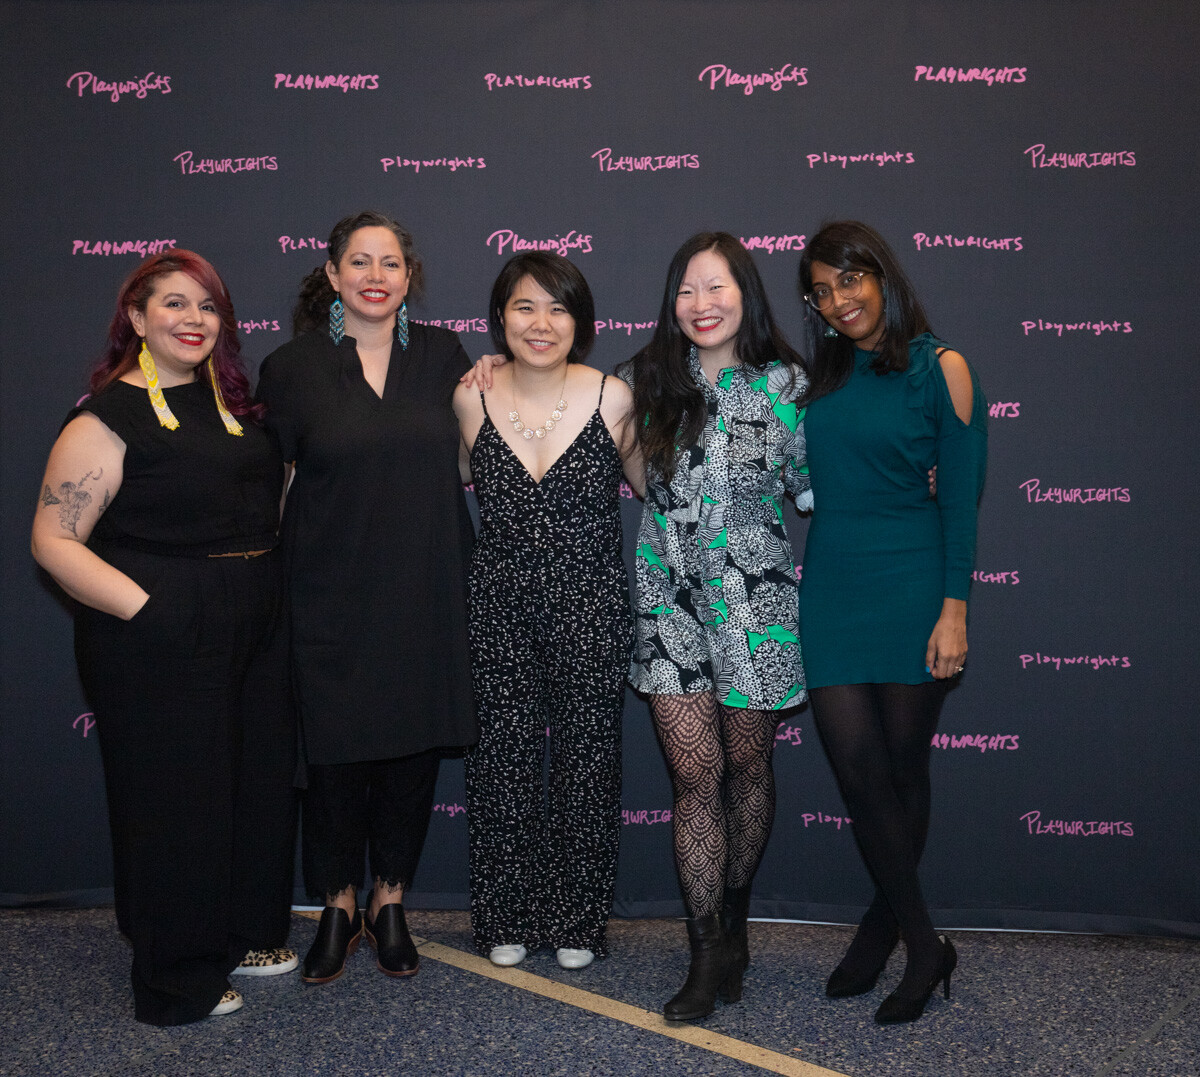 Five women pose in front of a premiere backdrop and smile.